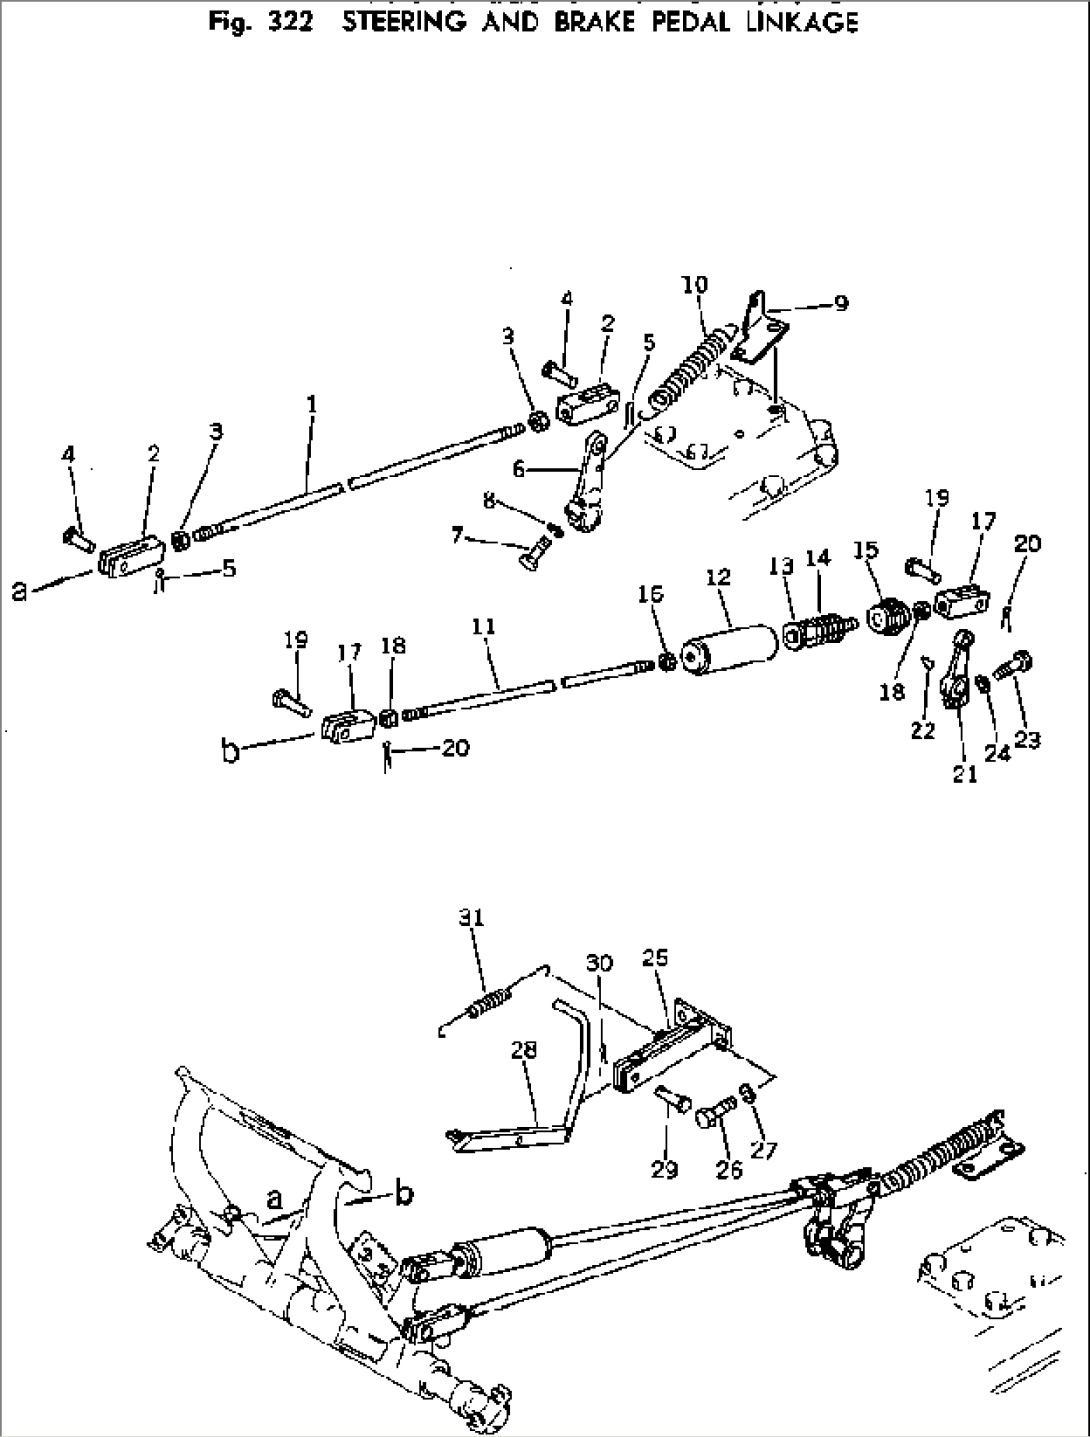 STEERING AND BRAKE PEDAL LINKAGE